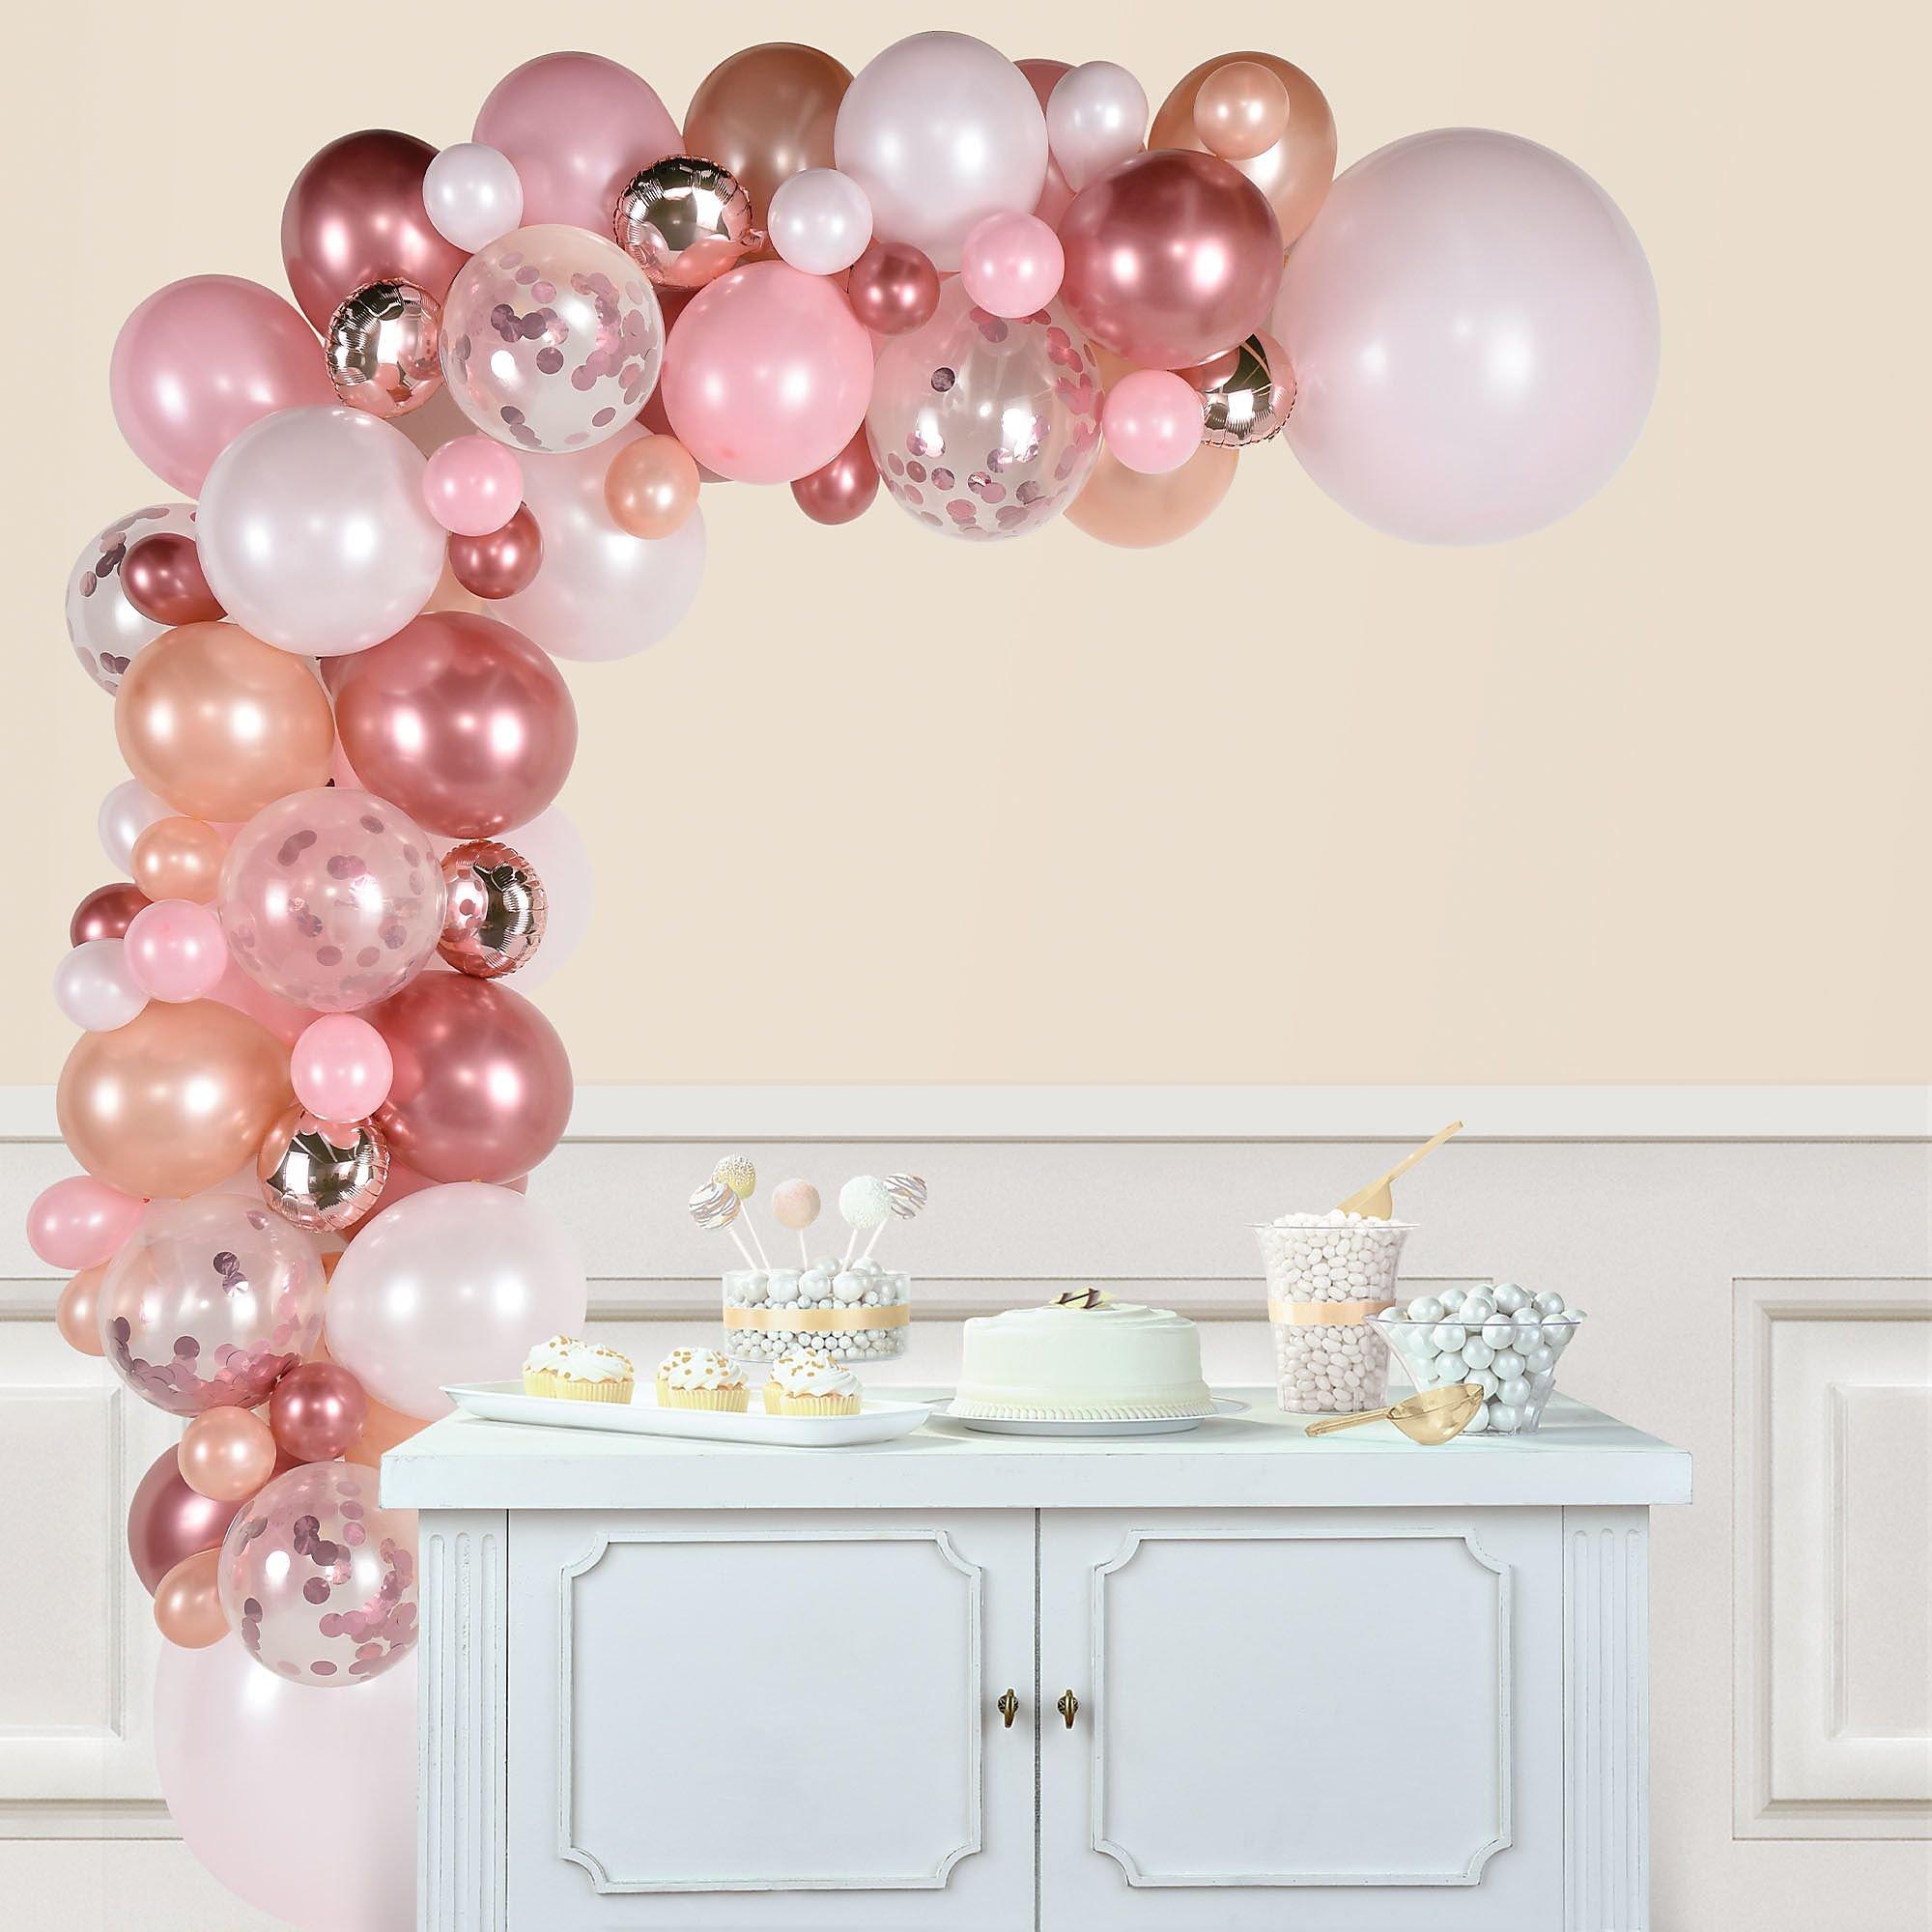 Balloon Attachment Glue Dot Attach Balloons To Ceiling or Wall